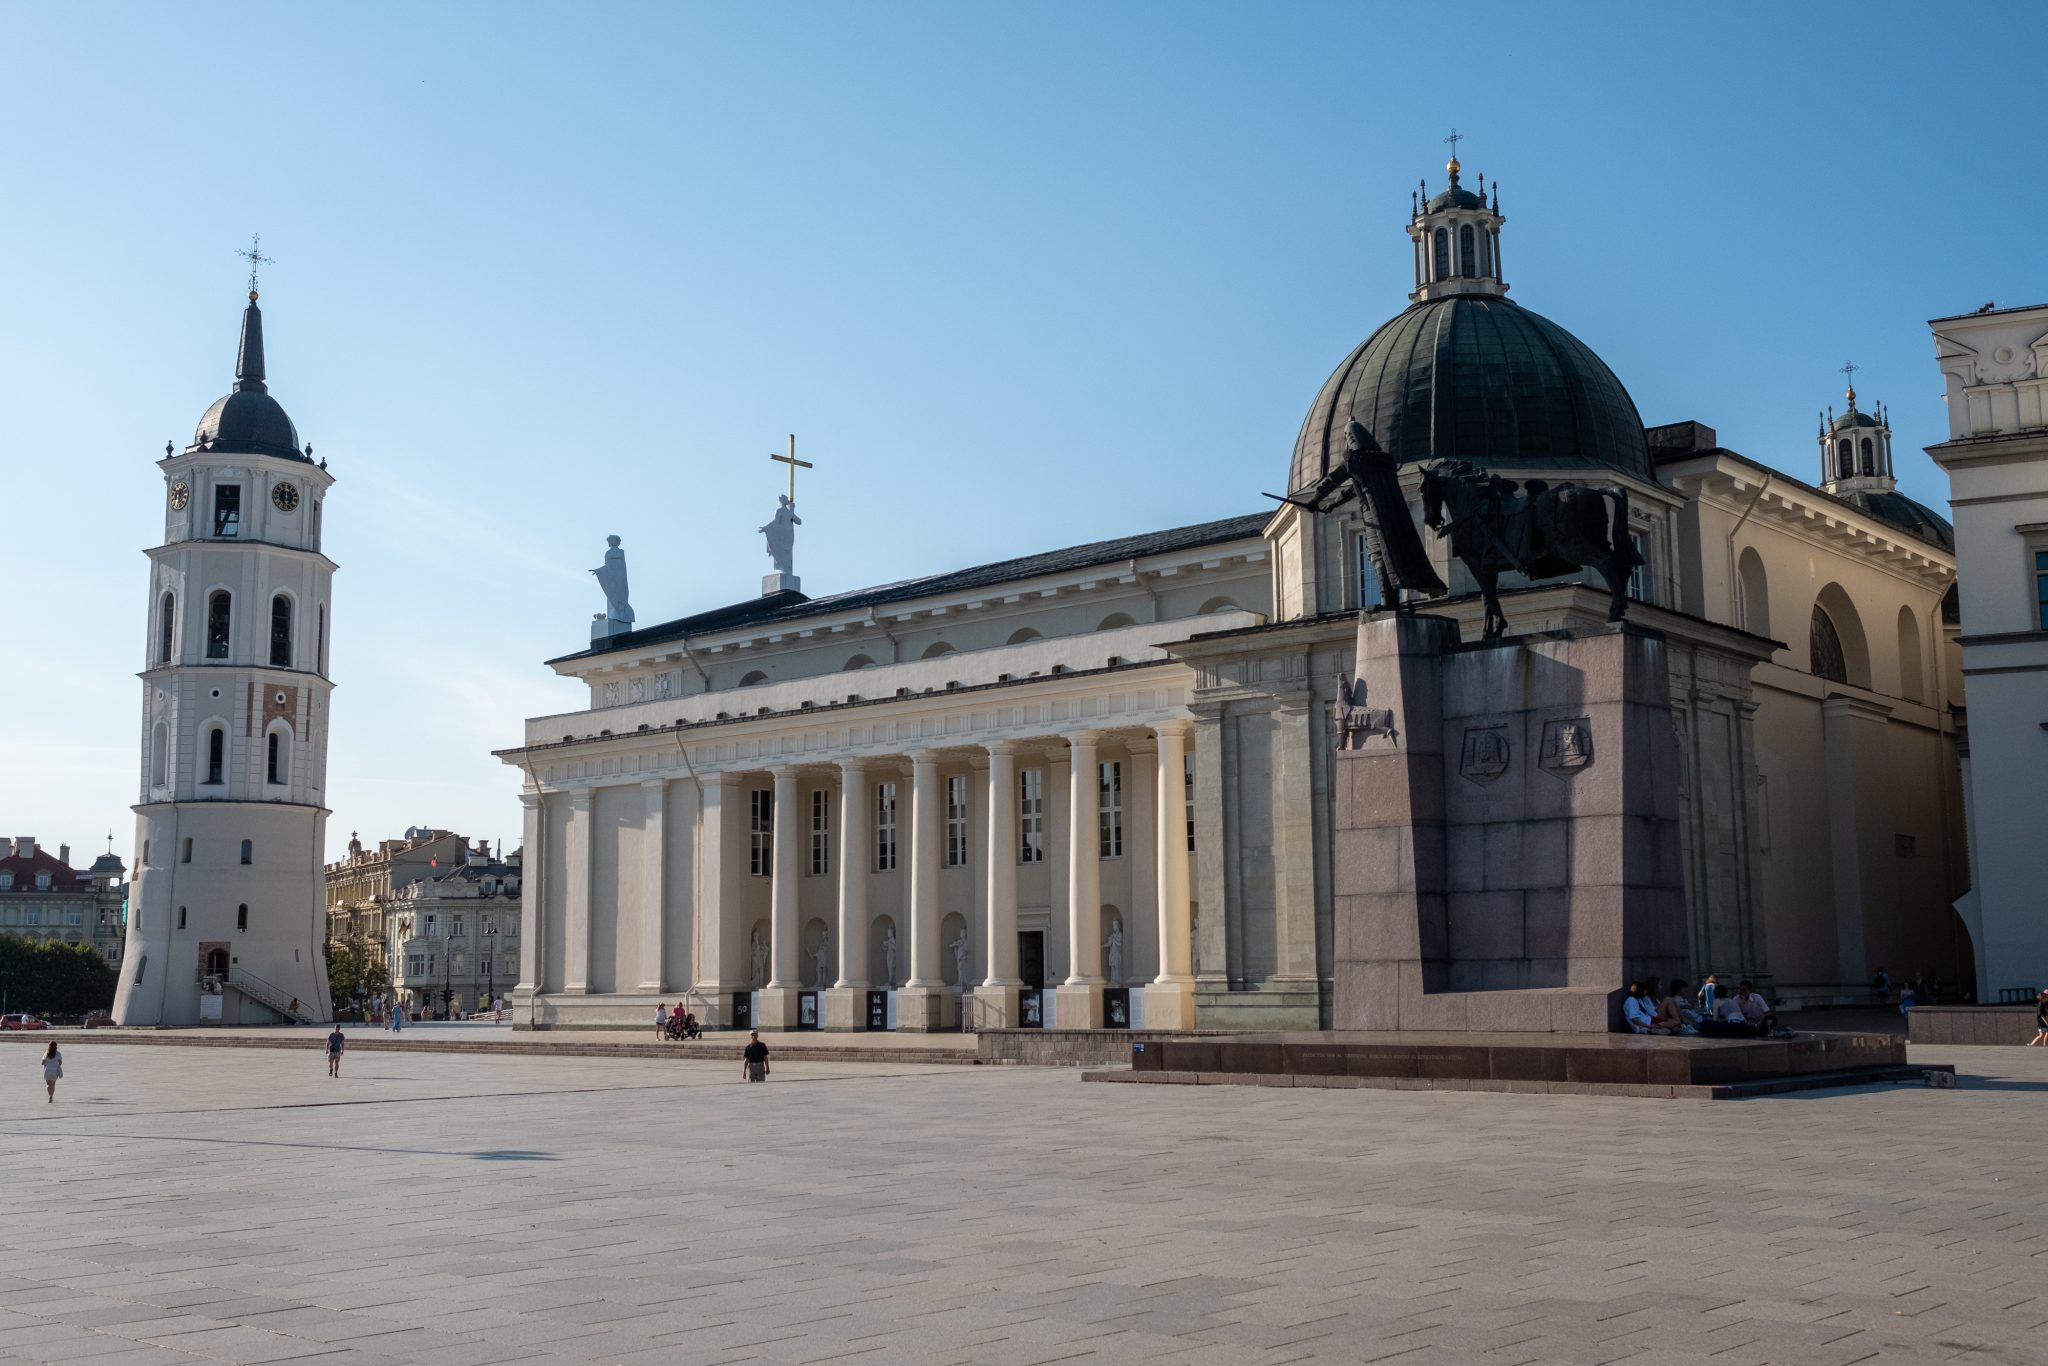 Cathedral Square, Vilnius - WorldPhotographyDay22